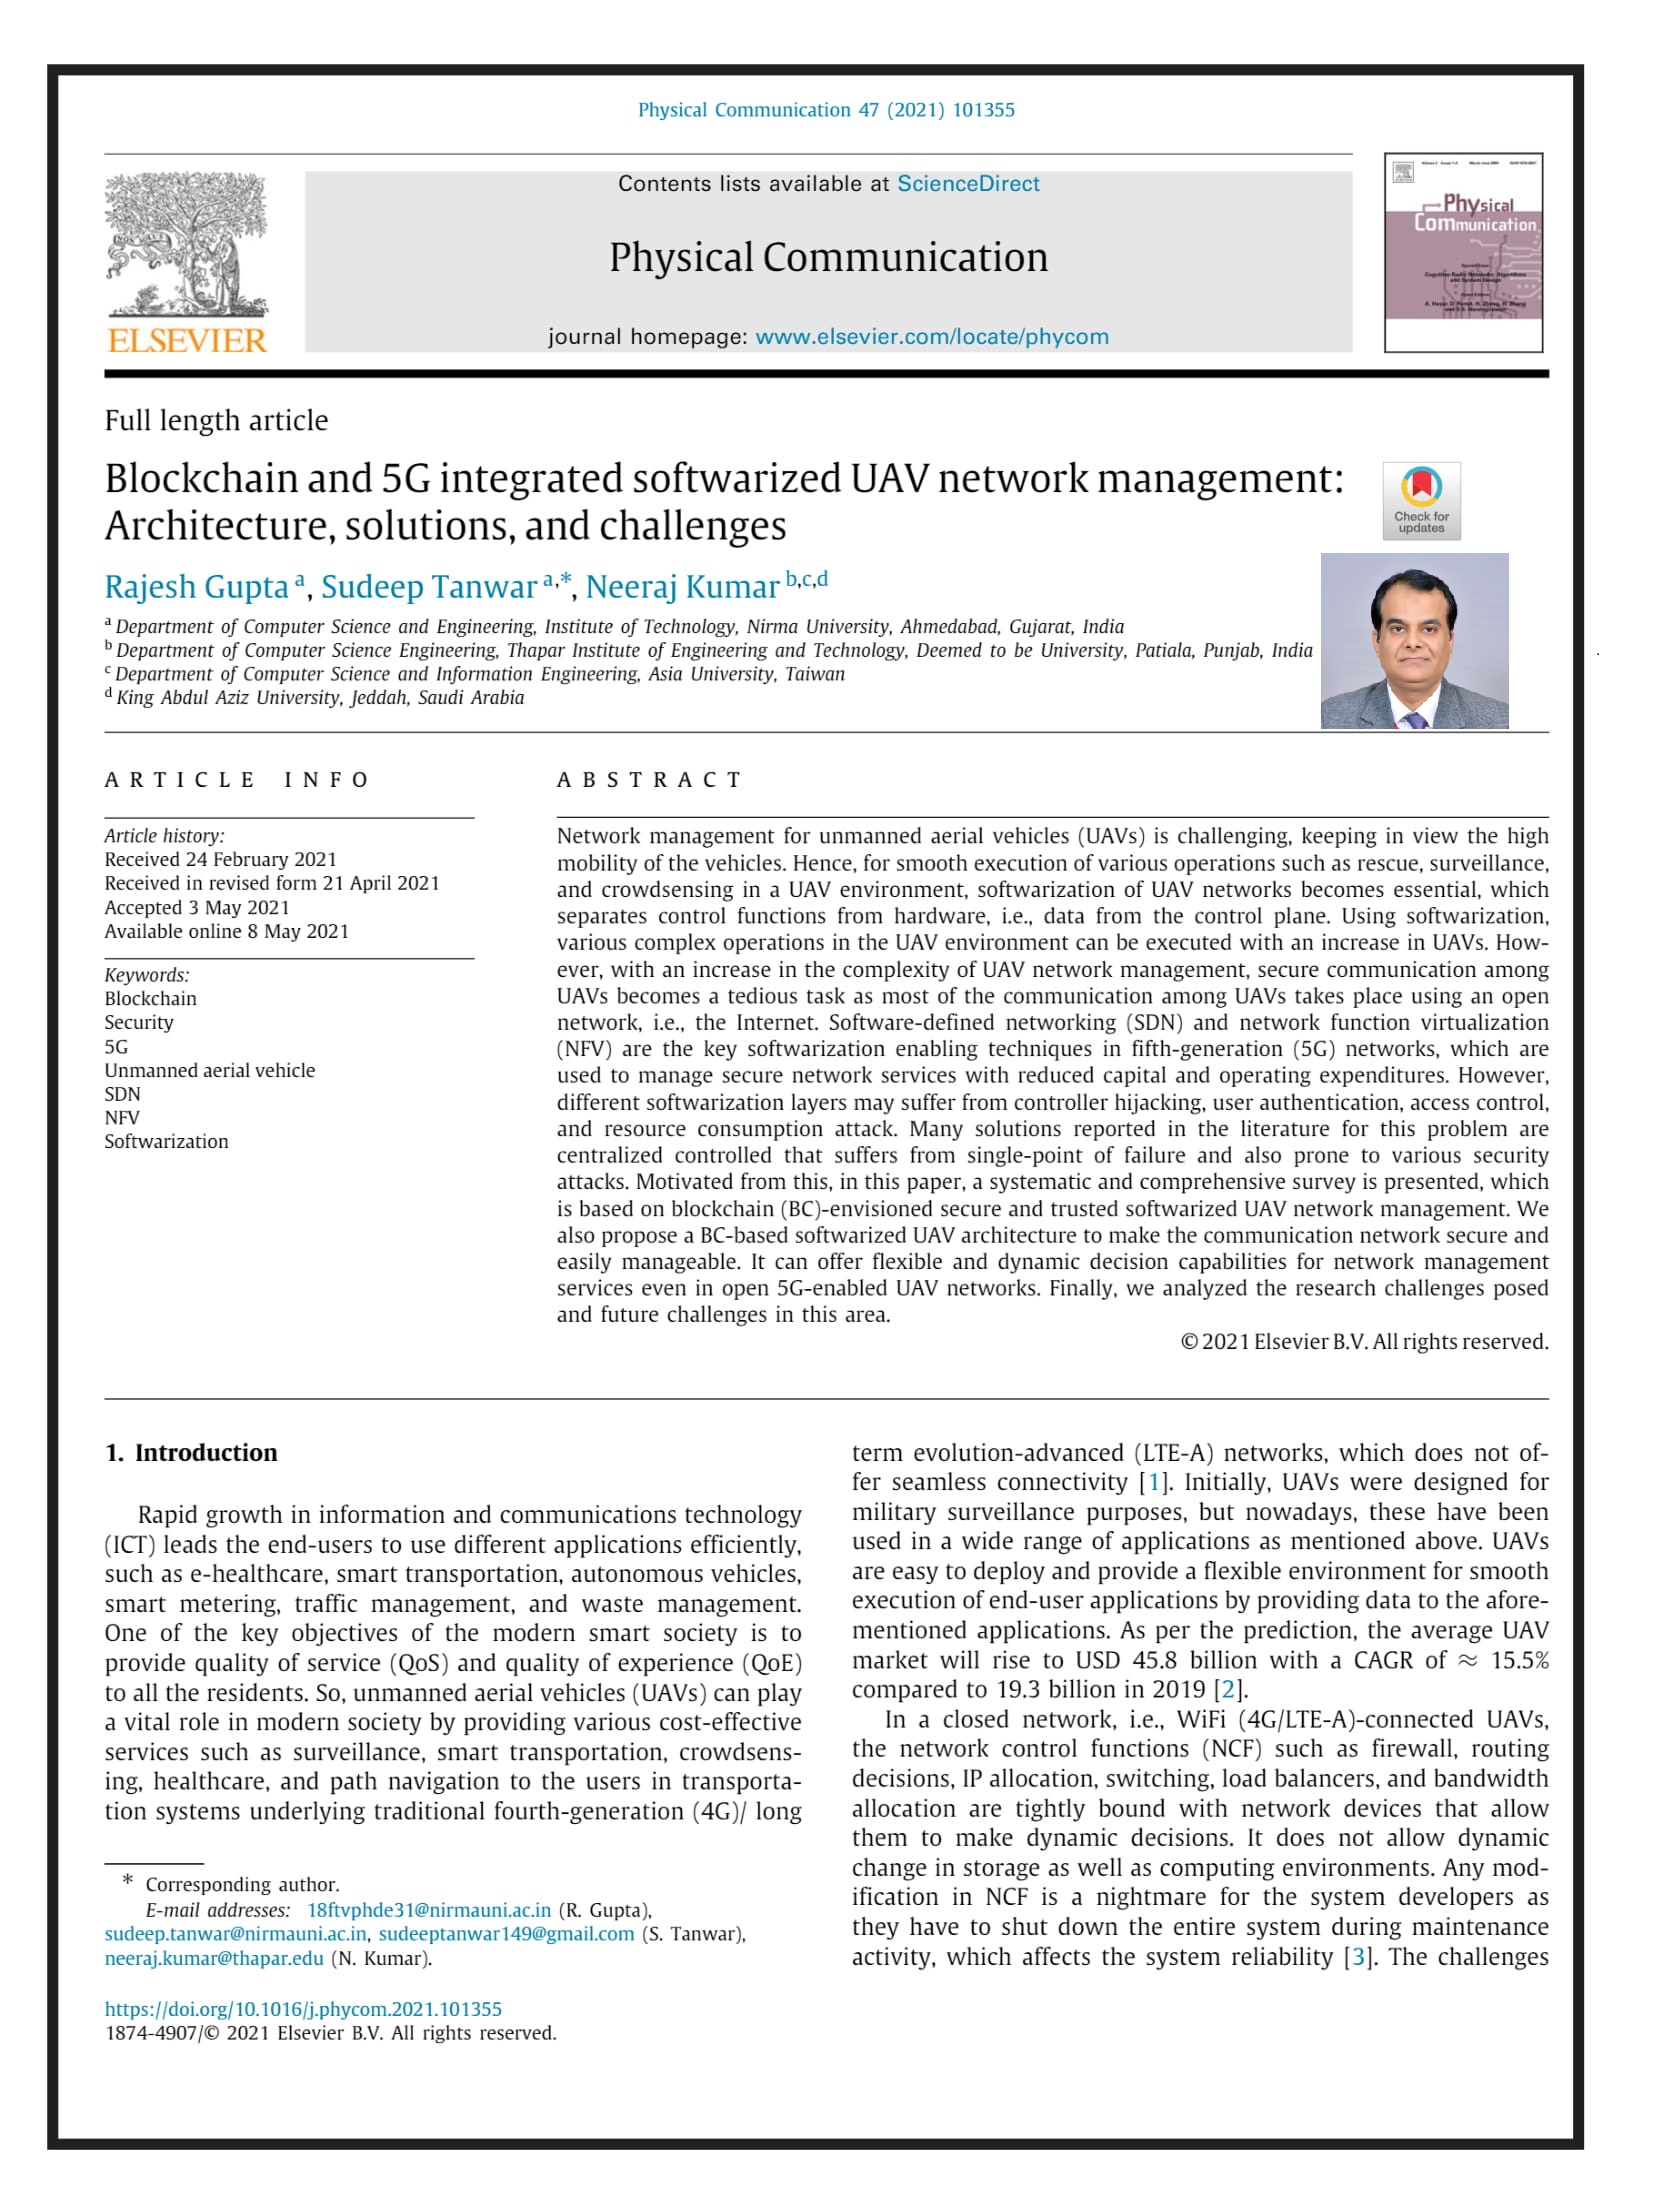 Blockchain and 5G integrated softwarized UAV network management: Architecture, solutions, and challenges